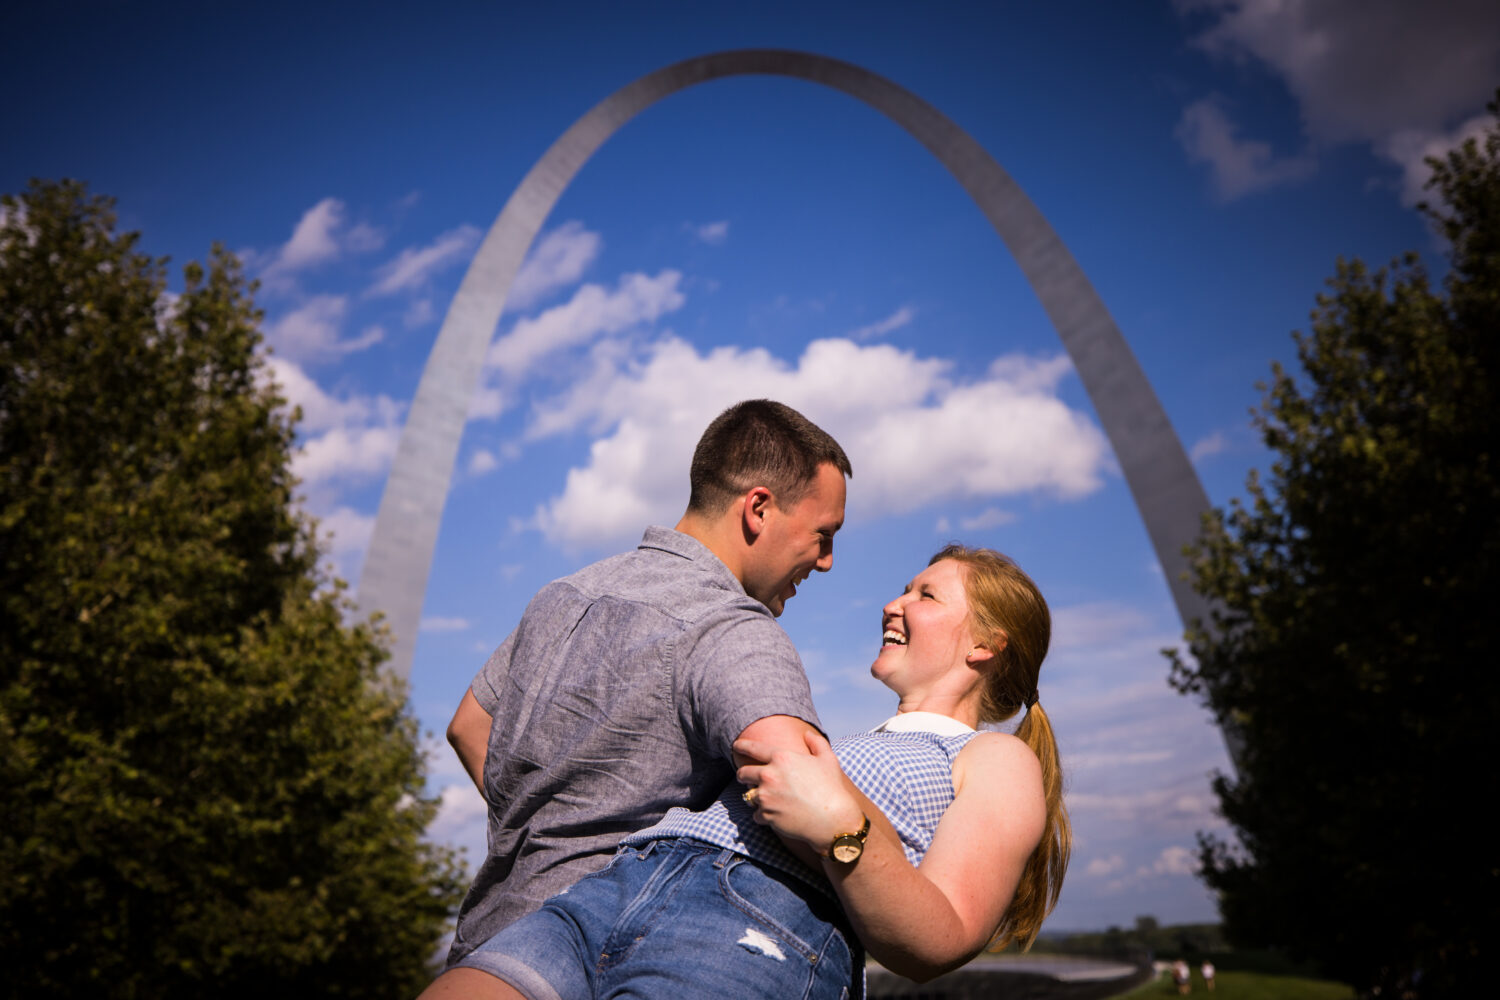 st louis missouri proposal photographer, lisa rhinehart, captures this fun, authentic, creative image of the couple as the guy dips the girl backwards as they stand underneath the archway 